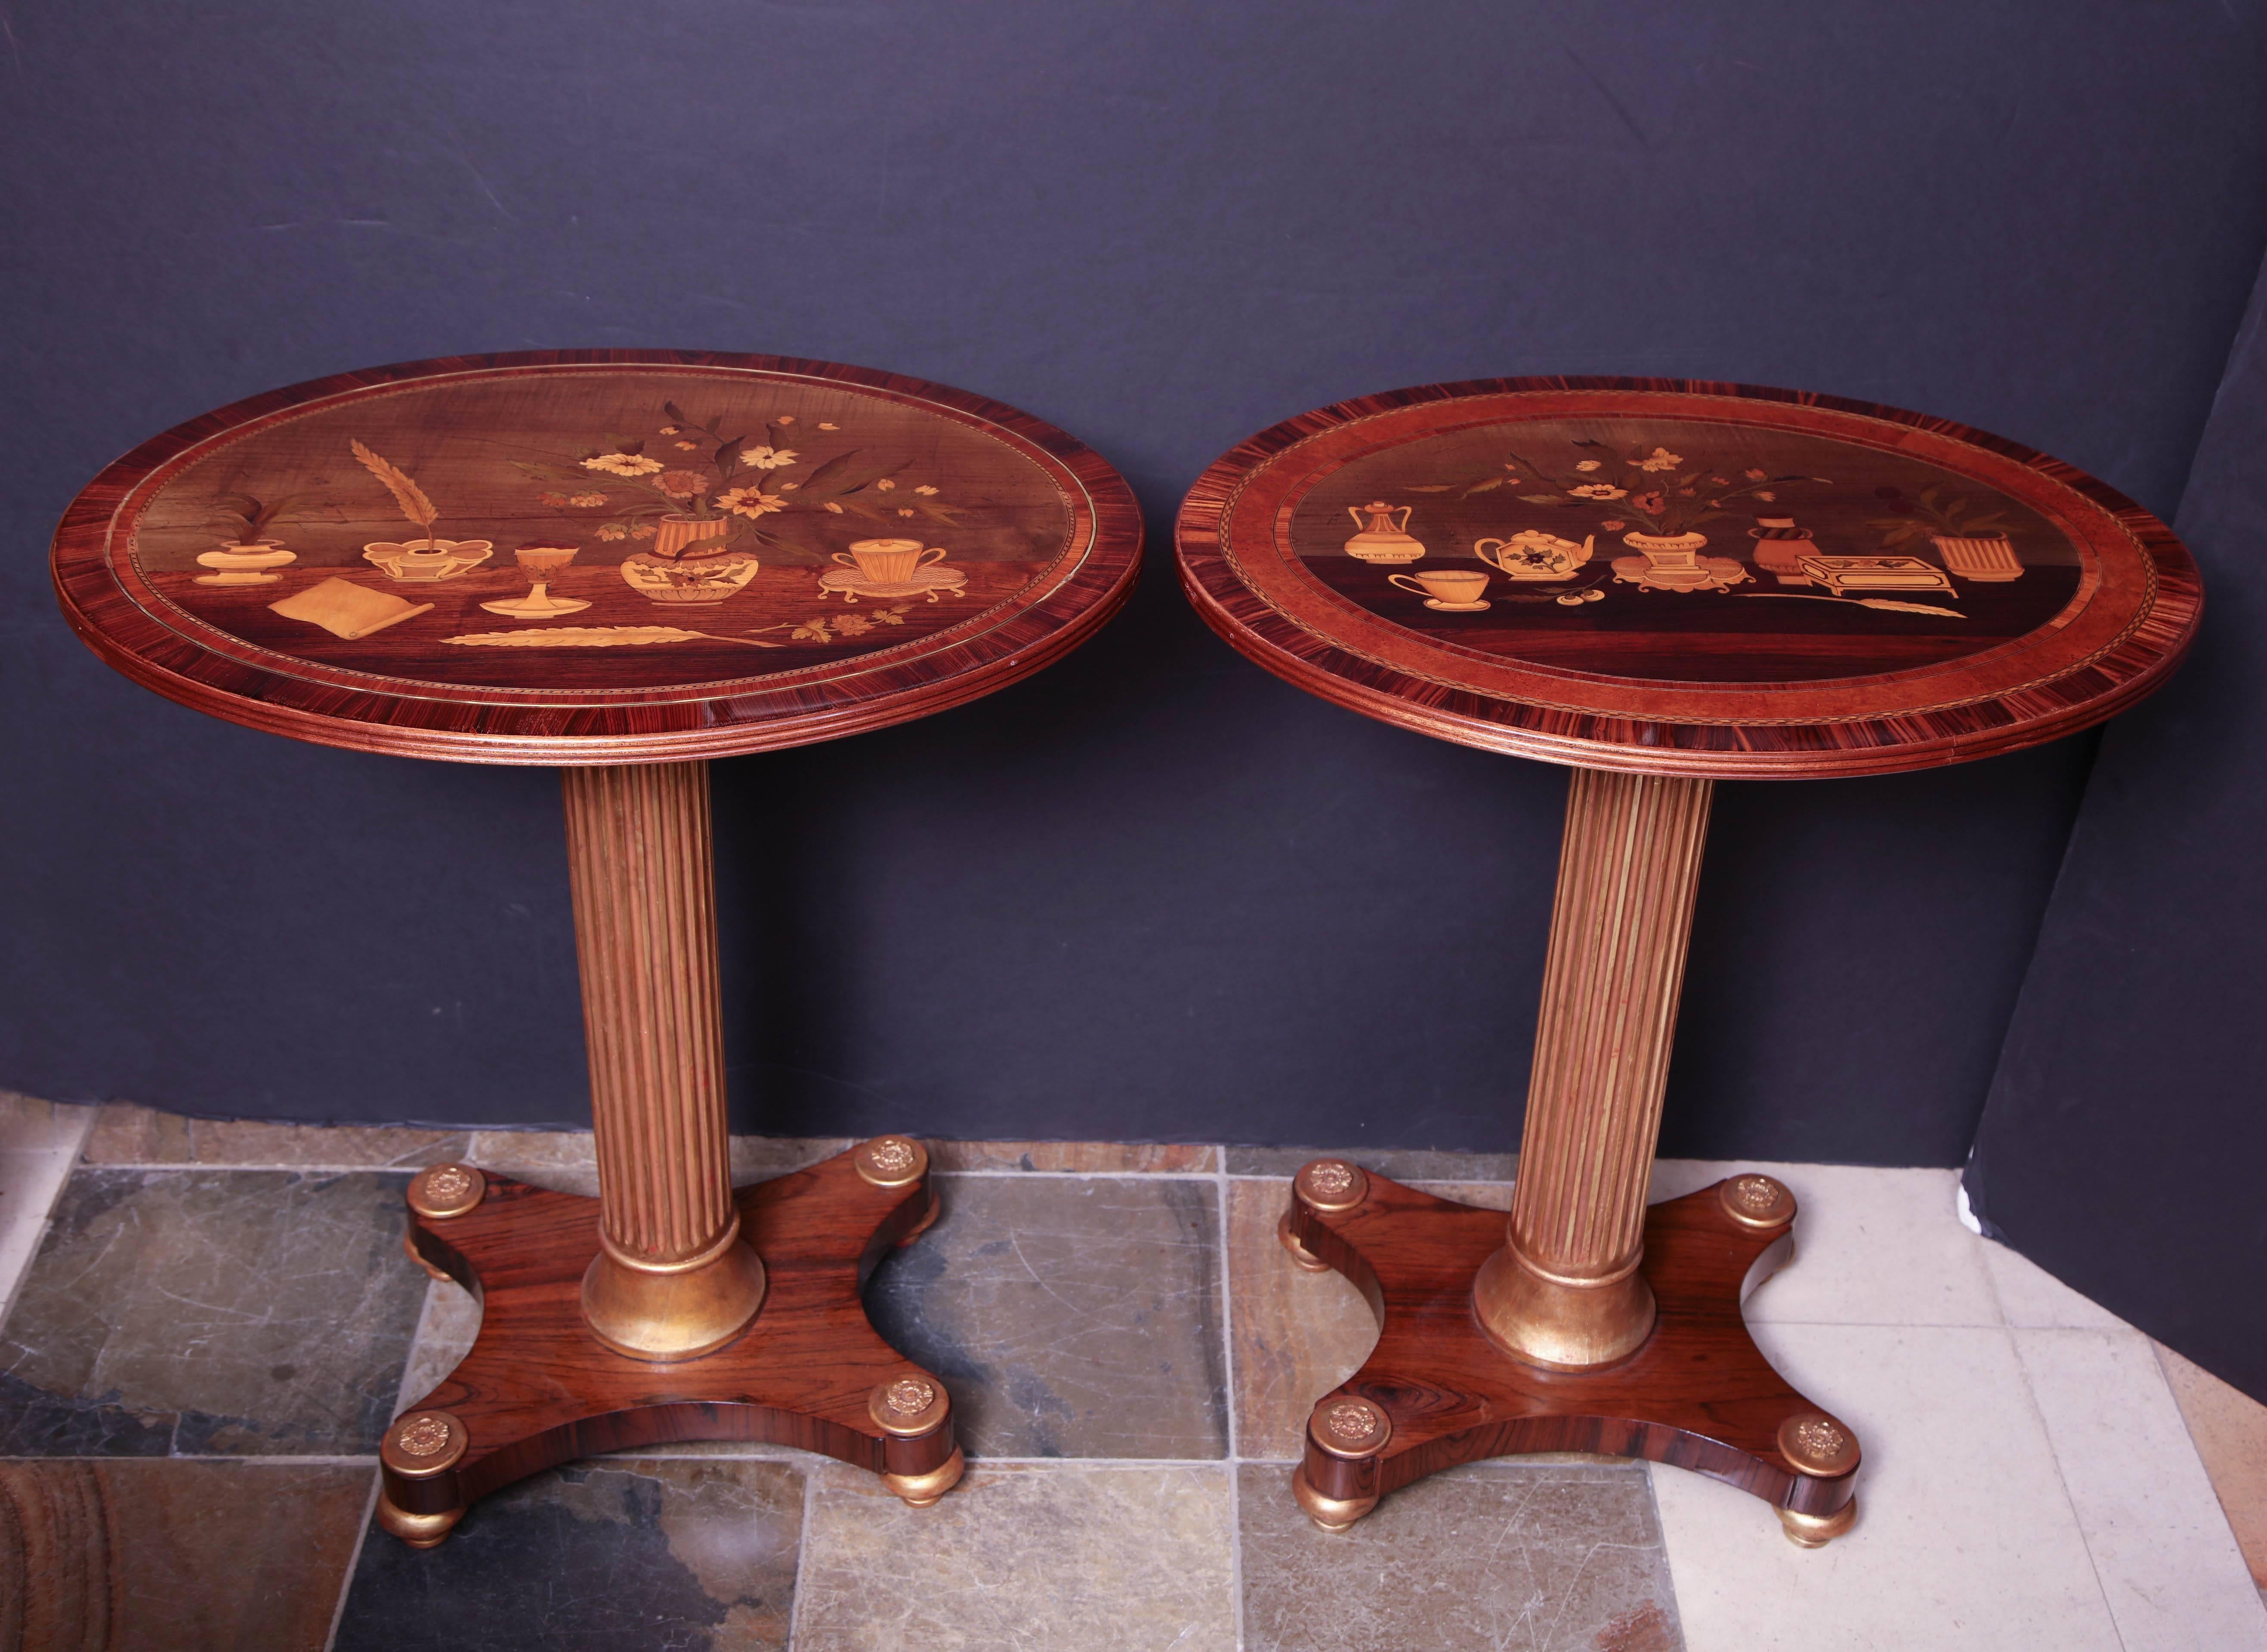 An unusual pair of French neoclassic marquetry oval panel top side tables with gilded fluted pedestal bases.